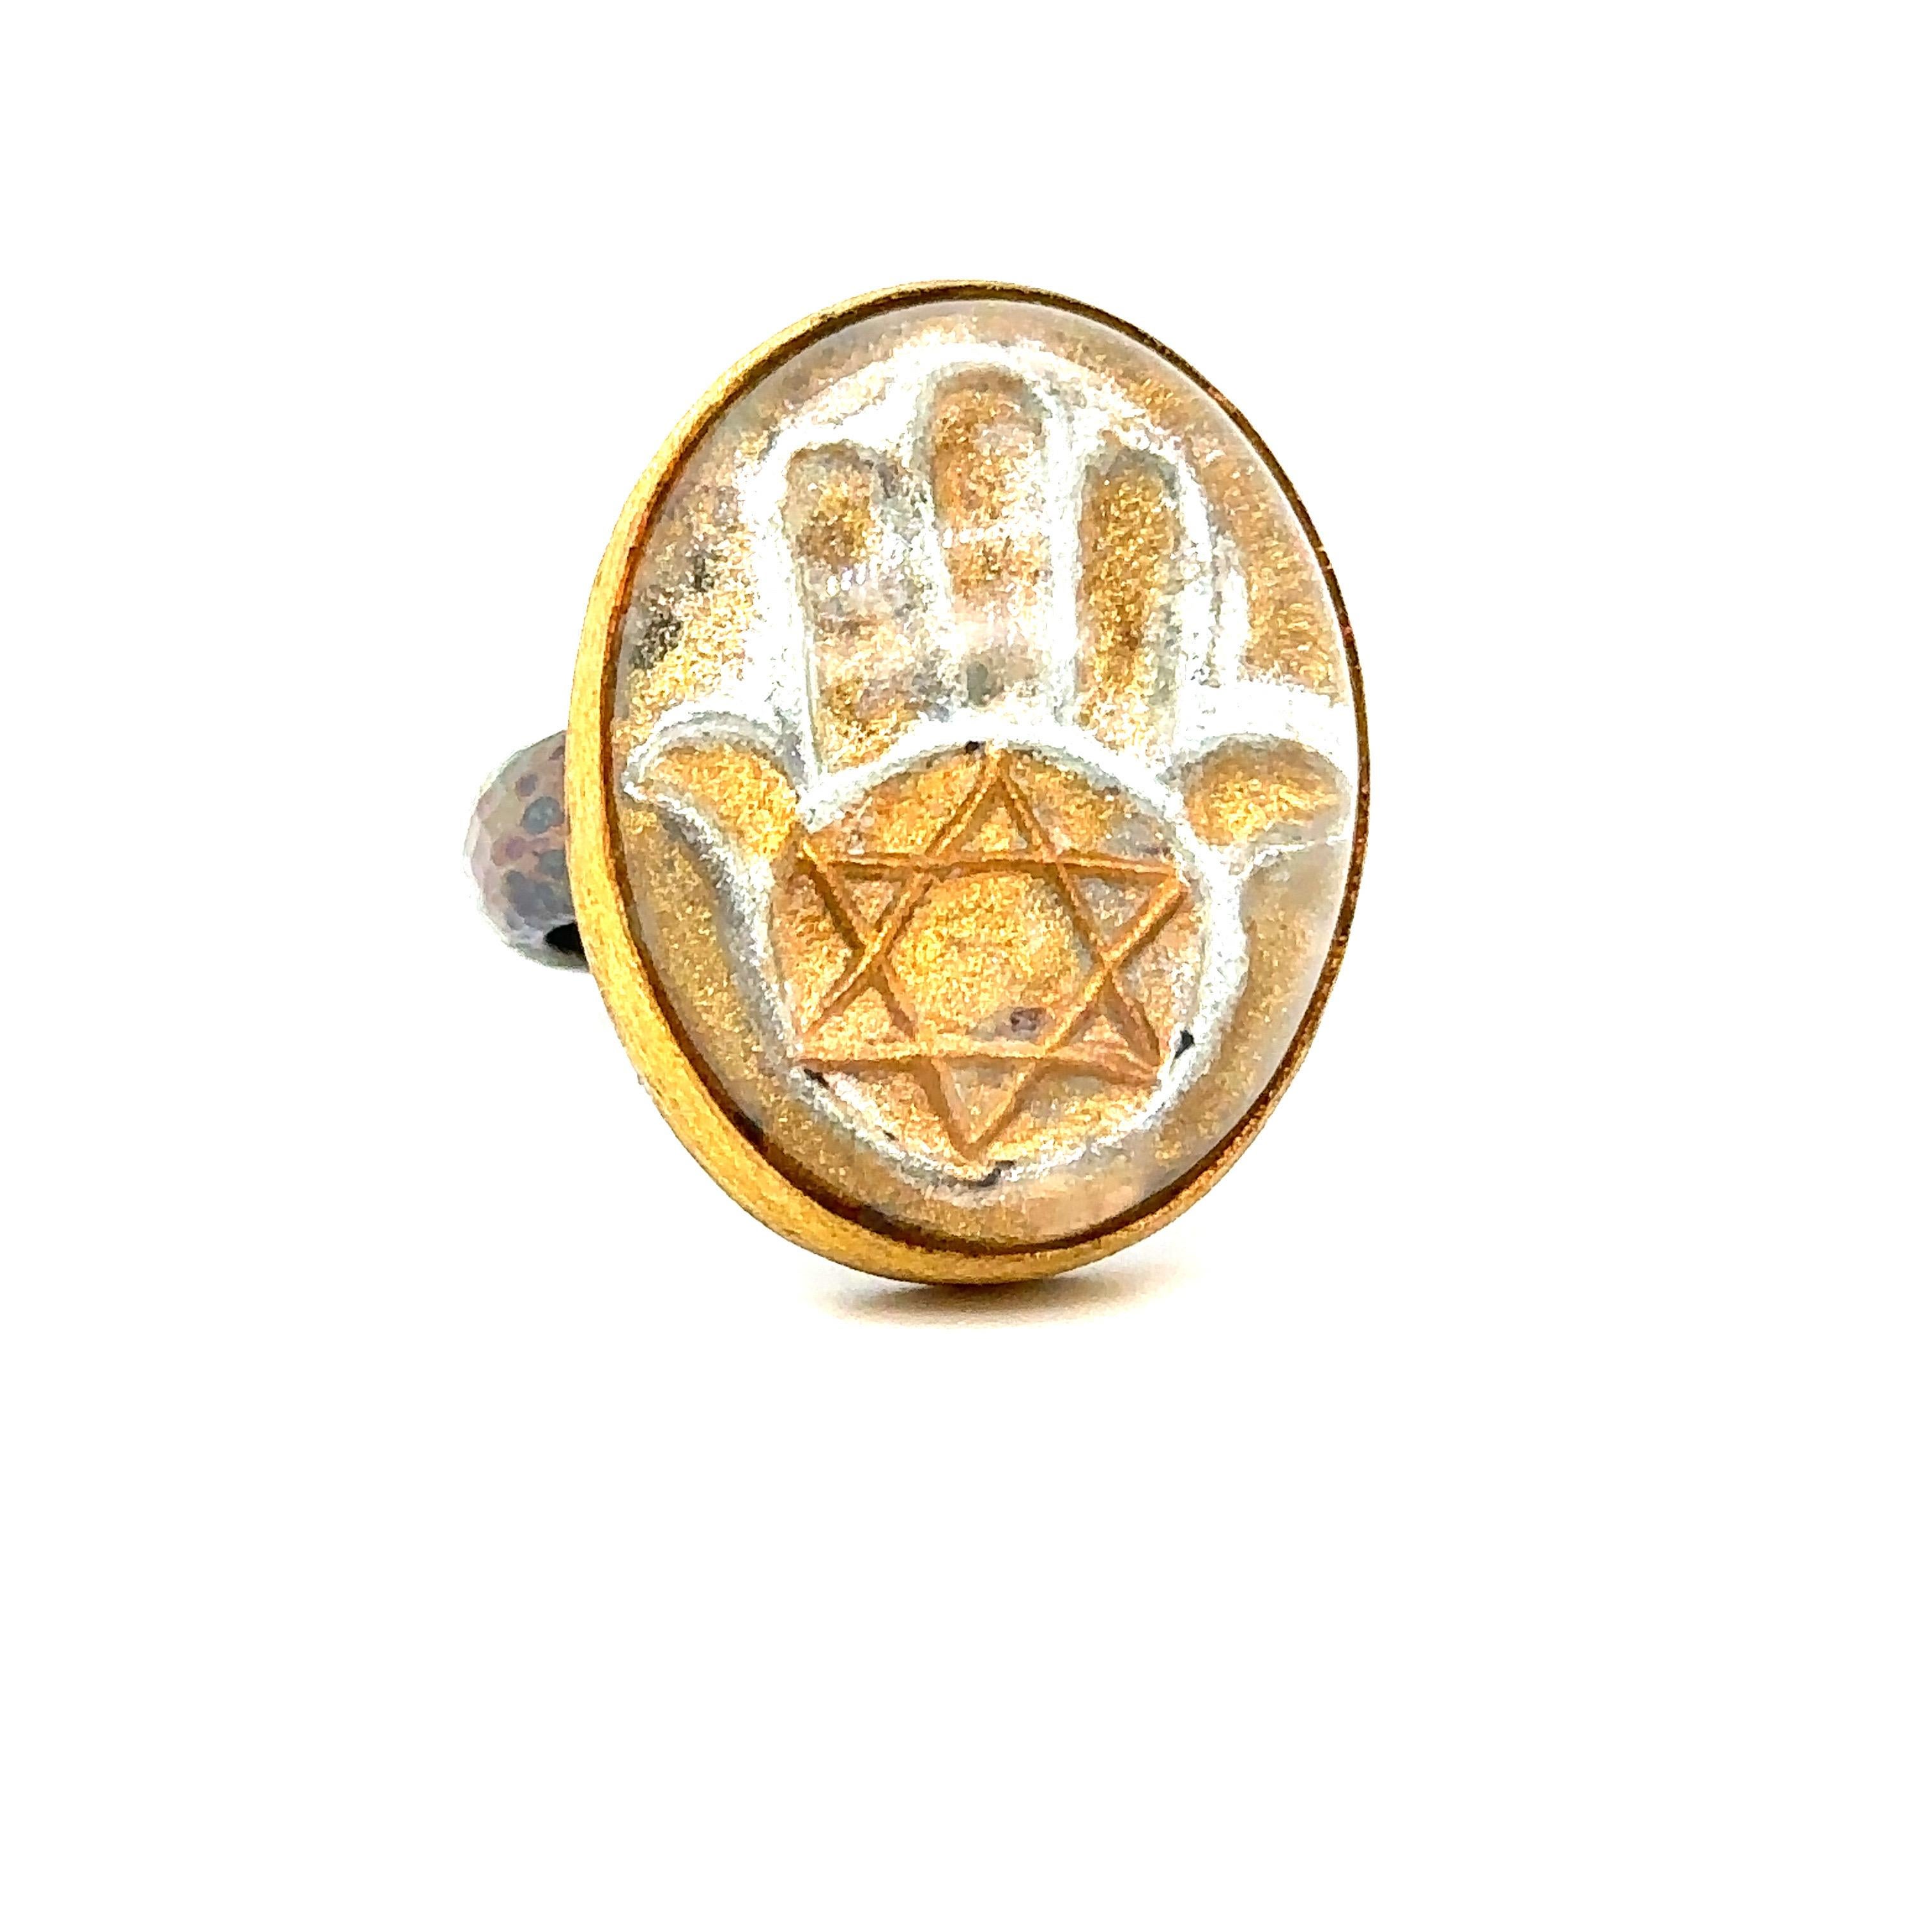 JAS-19-1818 - 24K GOLD/STERLING SILVER HAMSA RING with 30.00CT CARVED QUARTZ  For Sale 3